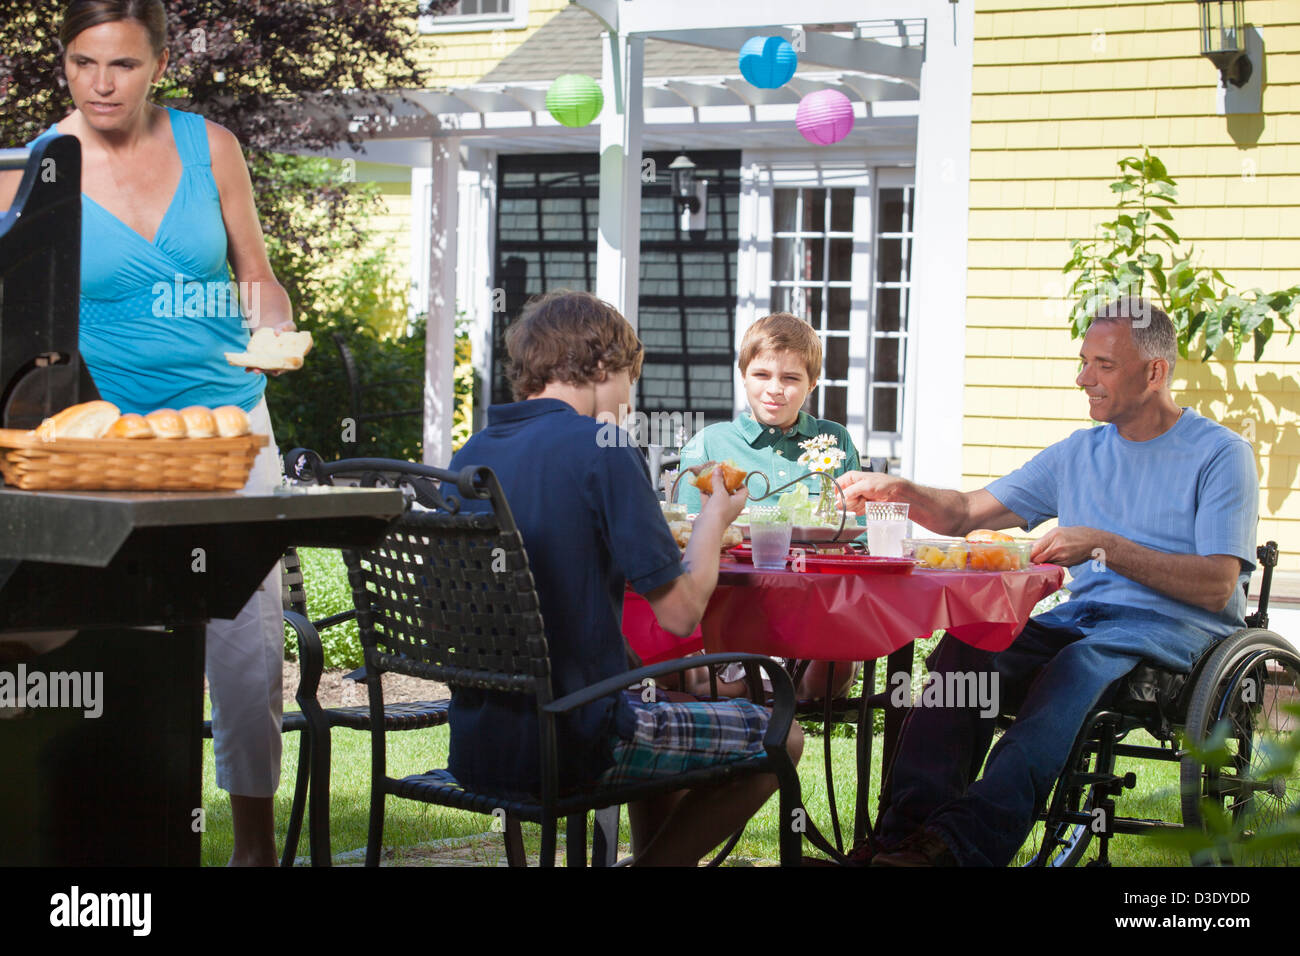 Man with spinal cord injury in wheelchair at family picnic Stock Photo